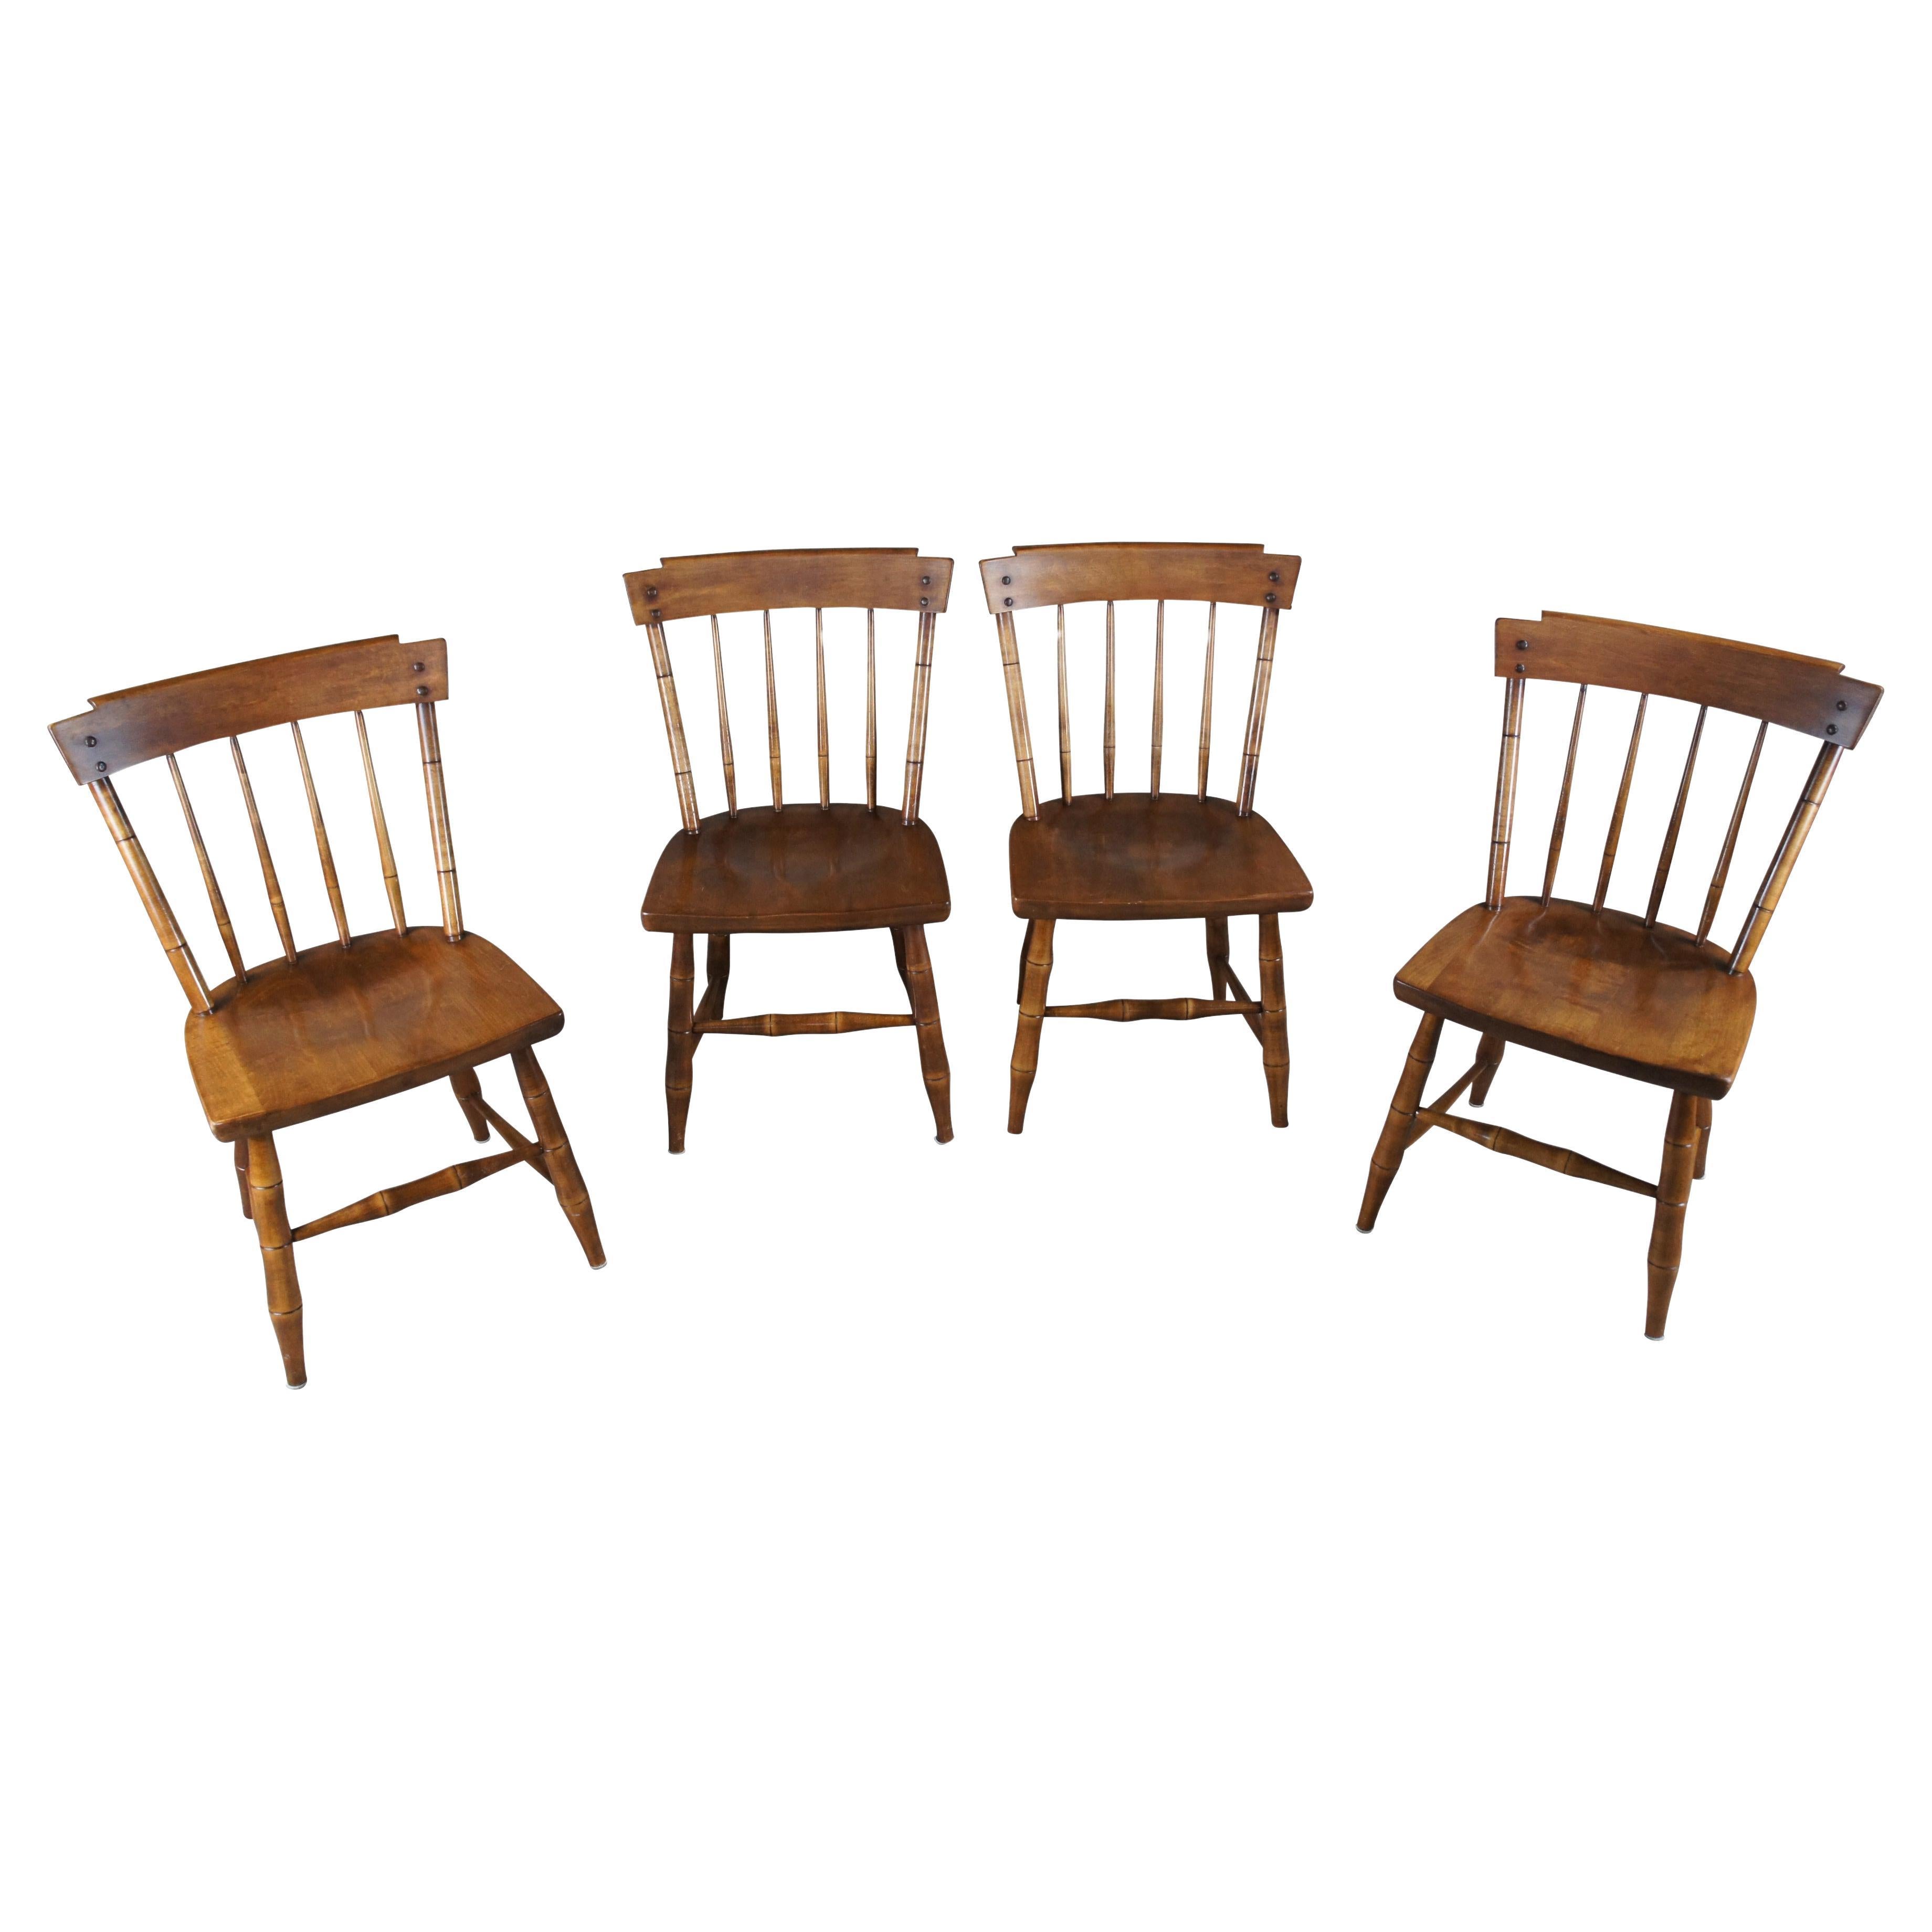 4 Mid Century Heywood Wakefield Maple Colonial Slat Back Dining Chairs 34"